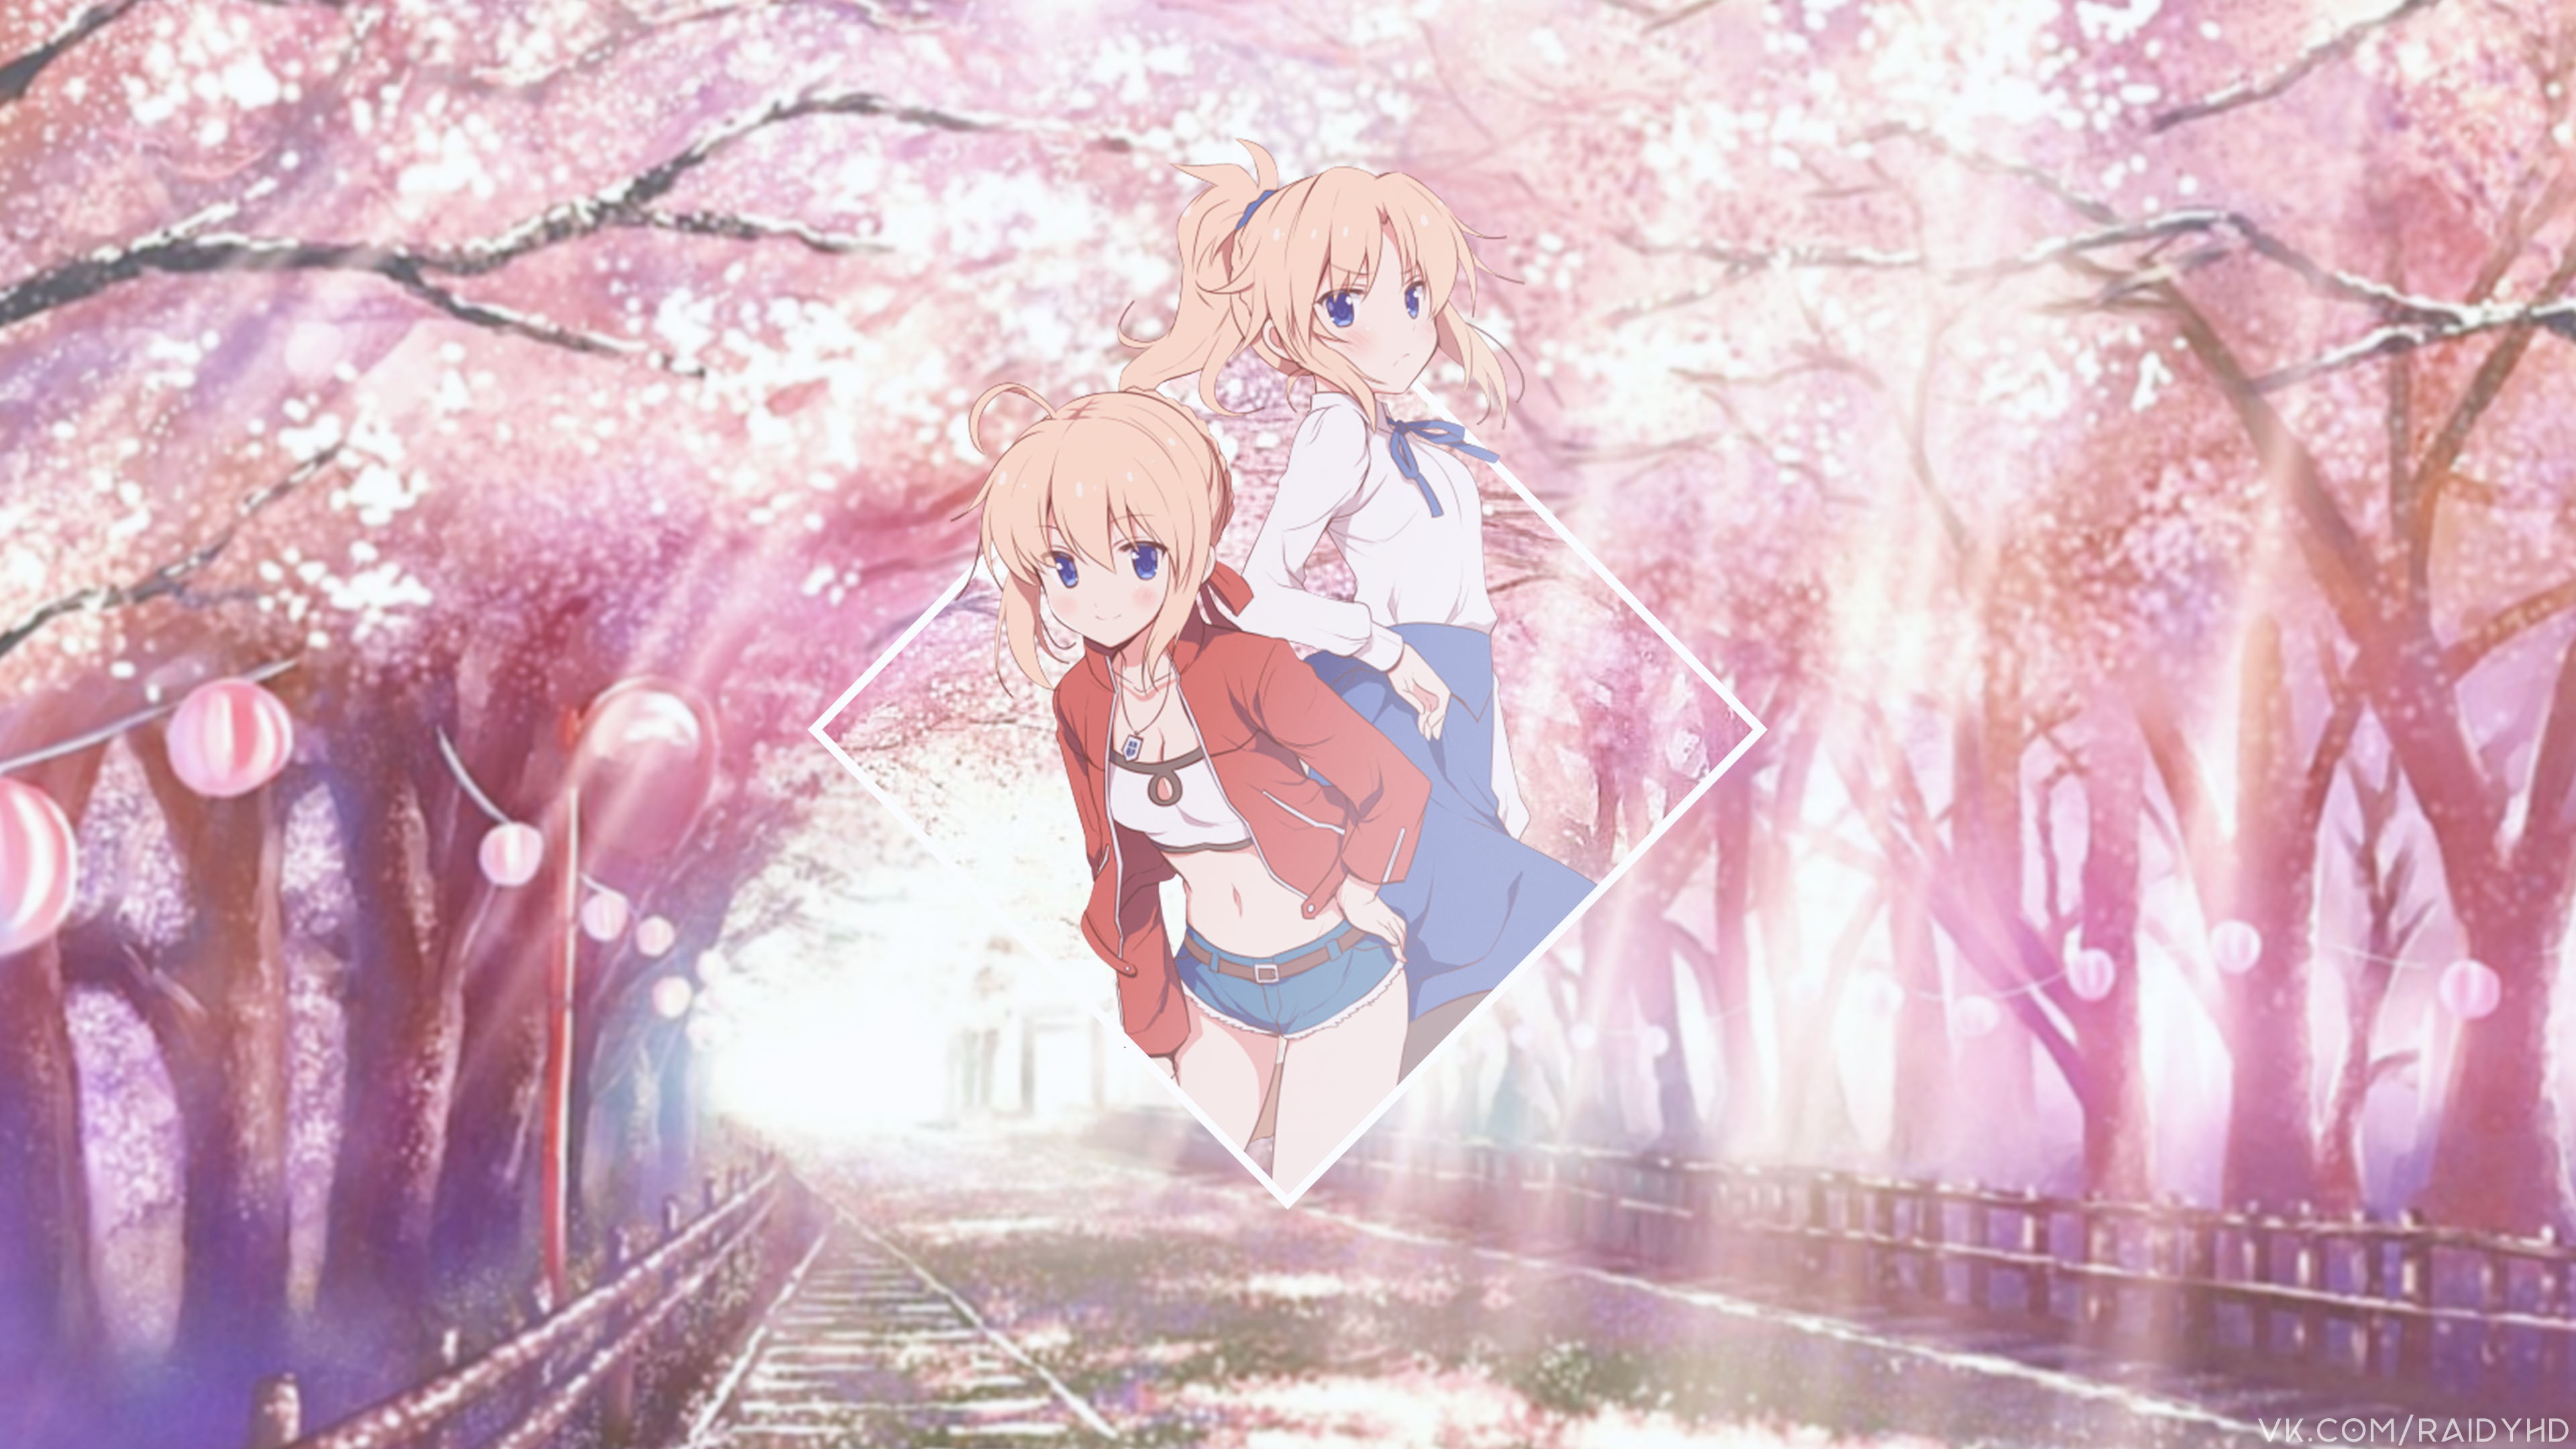 Anime Anime Girls Picture In Picture Fate Series Fate Stay Night Fate Apocrypha Saber Arturia Pendra 3840x2160